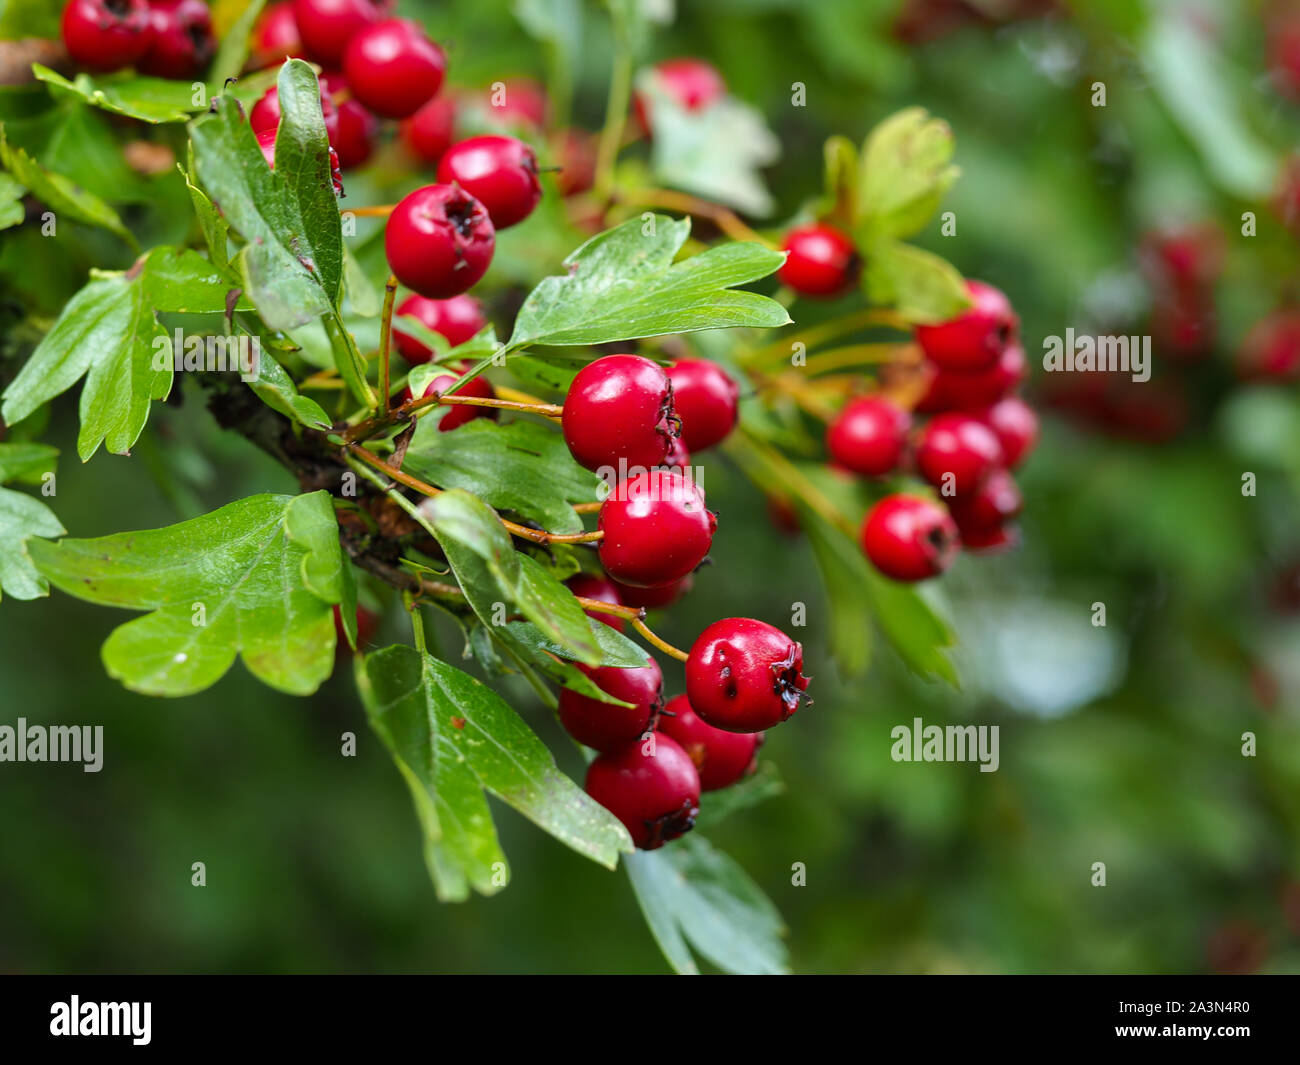 Bright red berries and green leaves on a hawthorn bush (Crataegus) Stock Photo